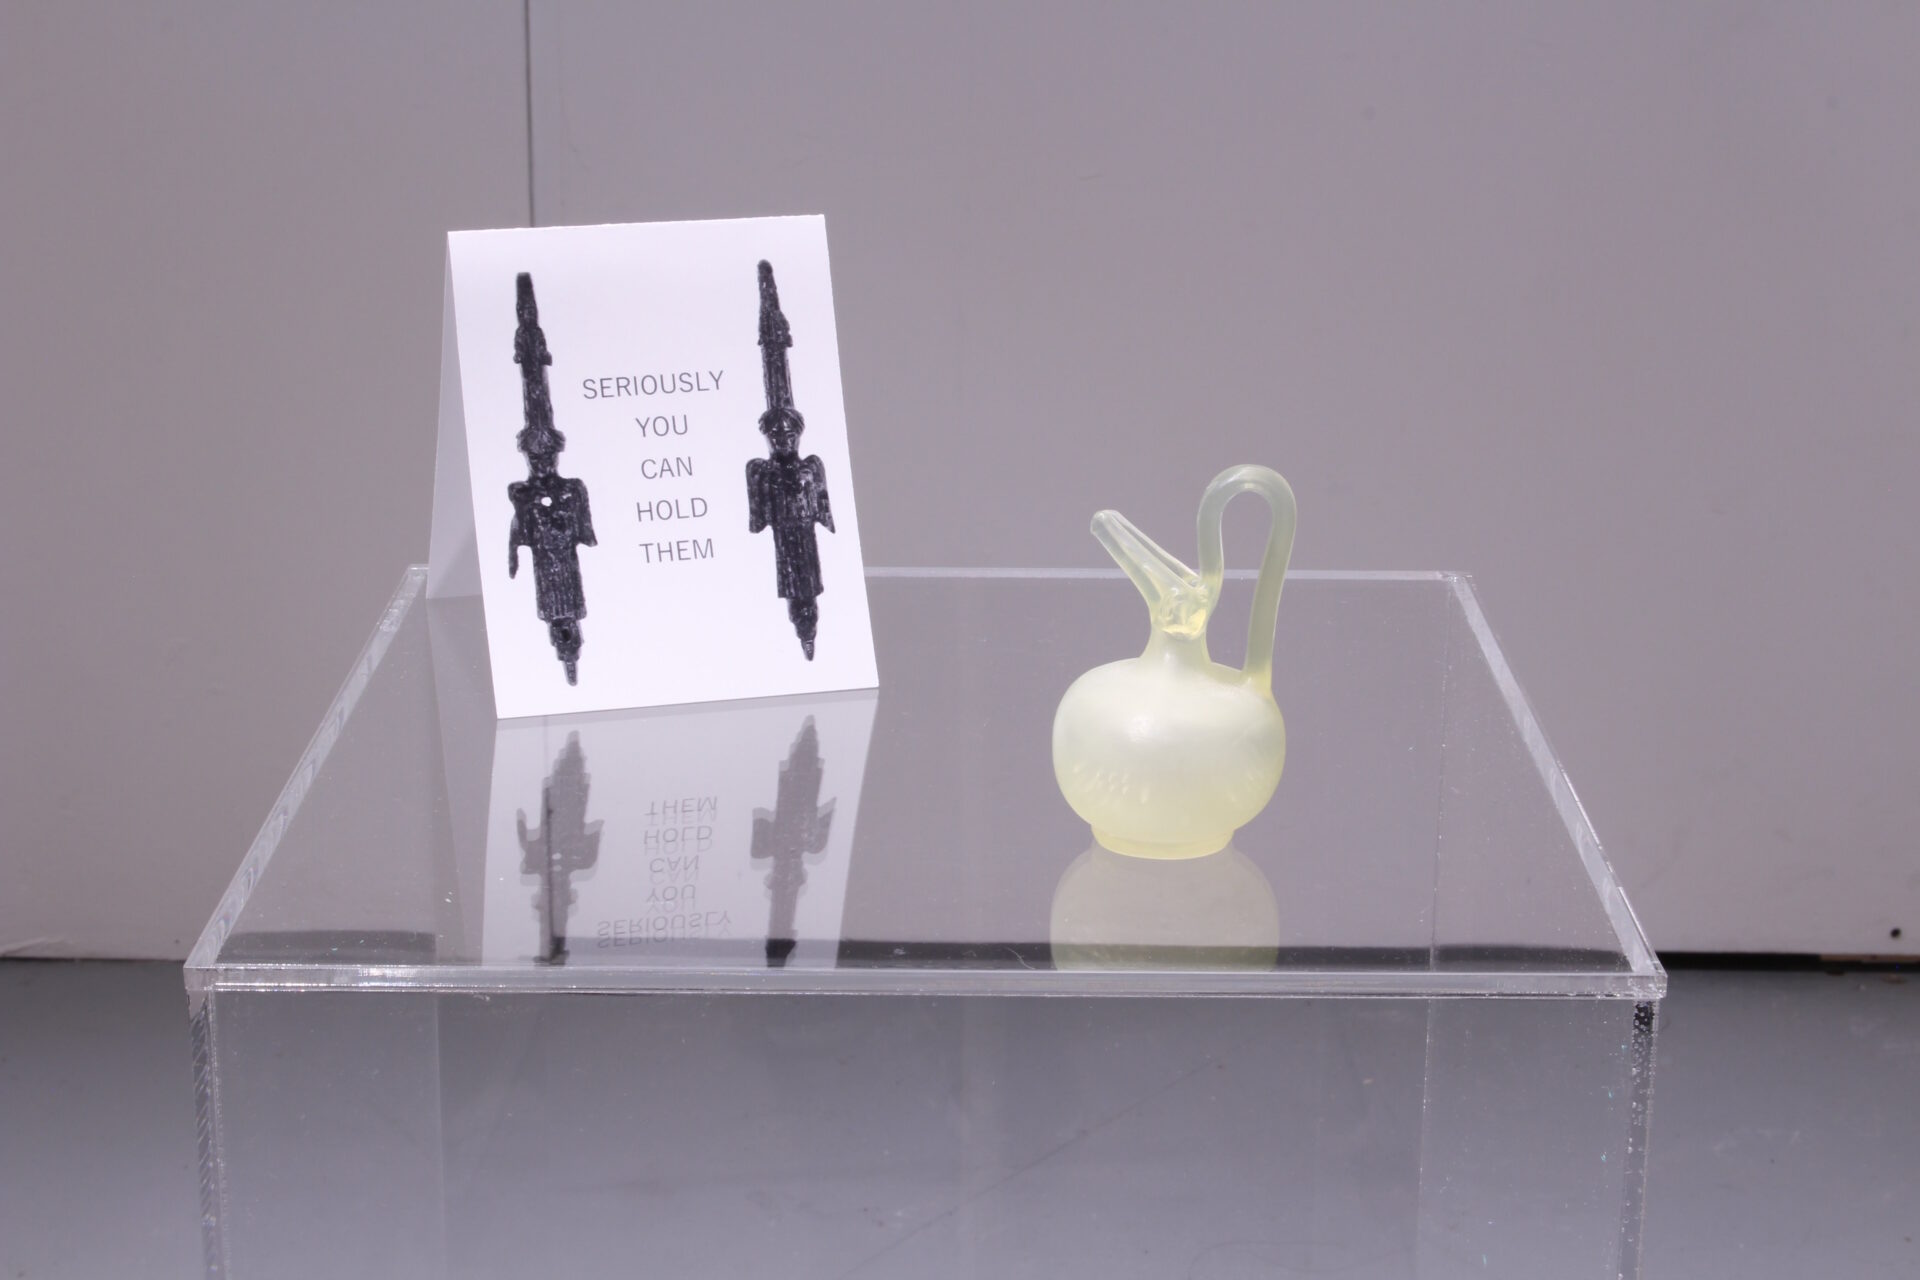 A small 3D printed resin jug on a clear Perspex plinth with a sign containing the words 'SERIOUSLY YOU CAN HOLD THEM'